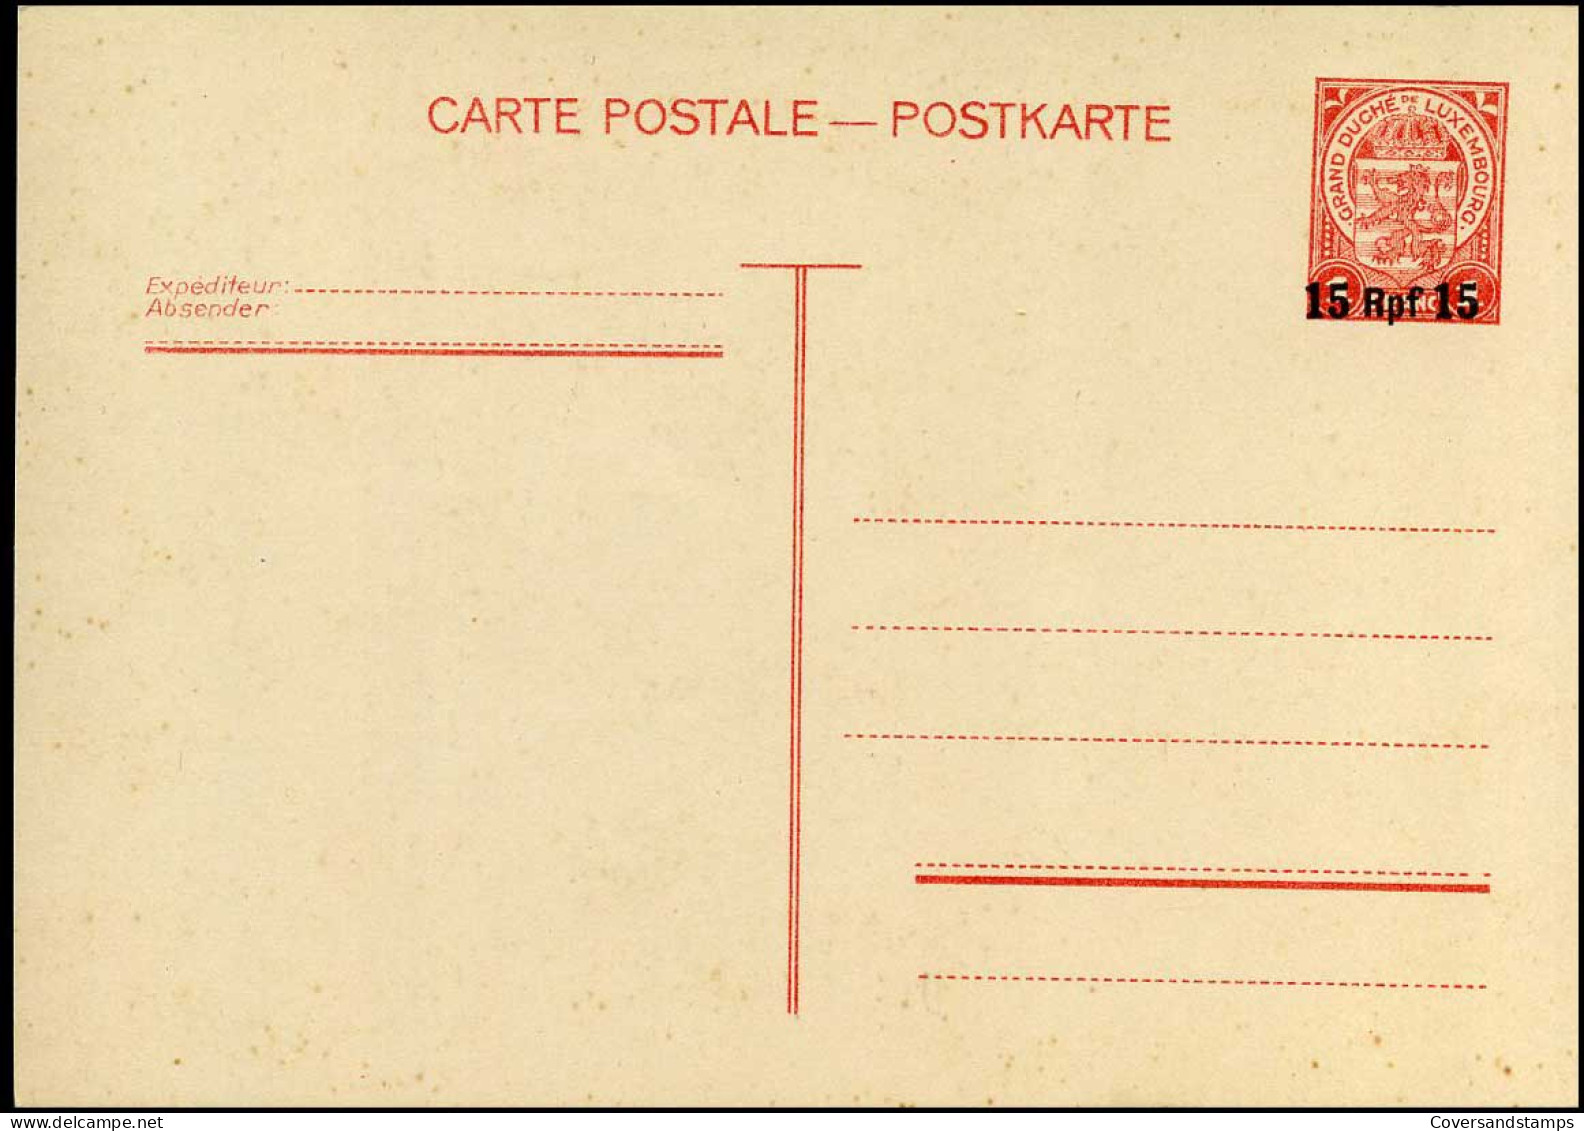 Luxembourg - Post Card - 15 Rpf On 1 Franc - Enteros Postales